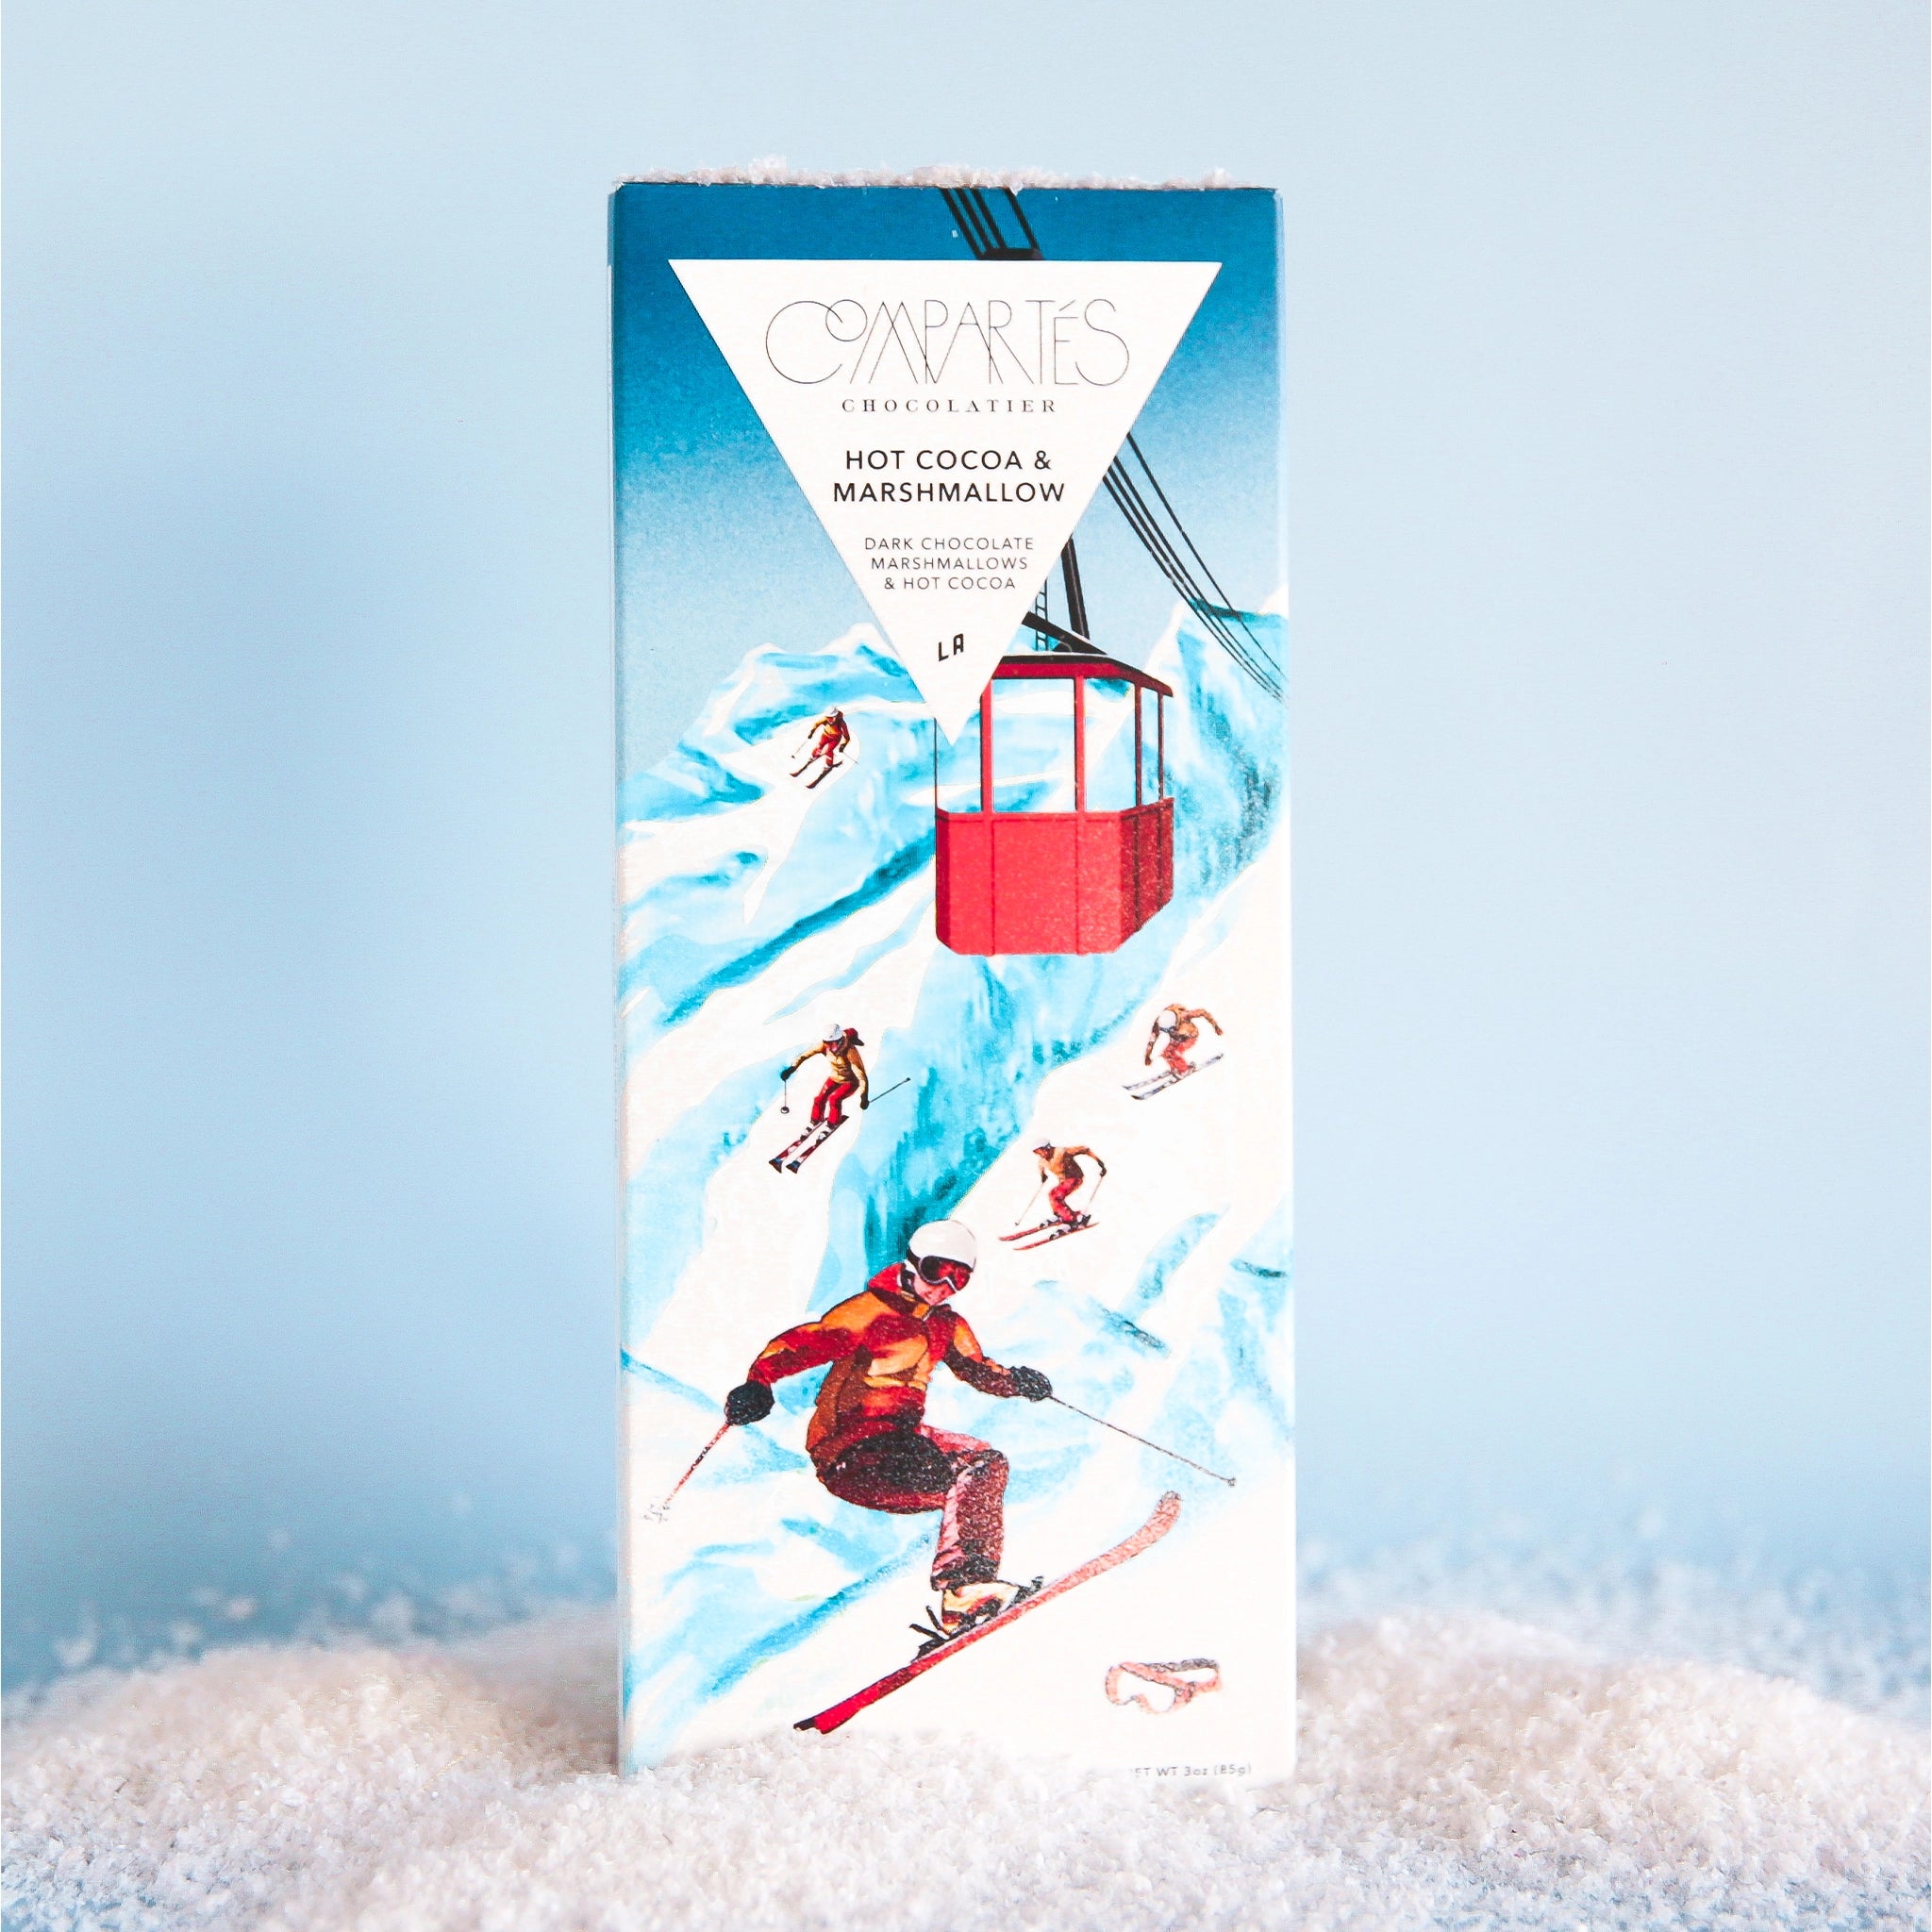 On a light blue background is a rectangle chocolate bar with packaging that features a mountain and skiers in red outfits along with text at the top that reads, "Compartes Hot Cocoa & Marshmallow Dark Chocolate".